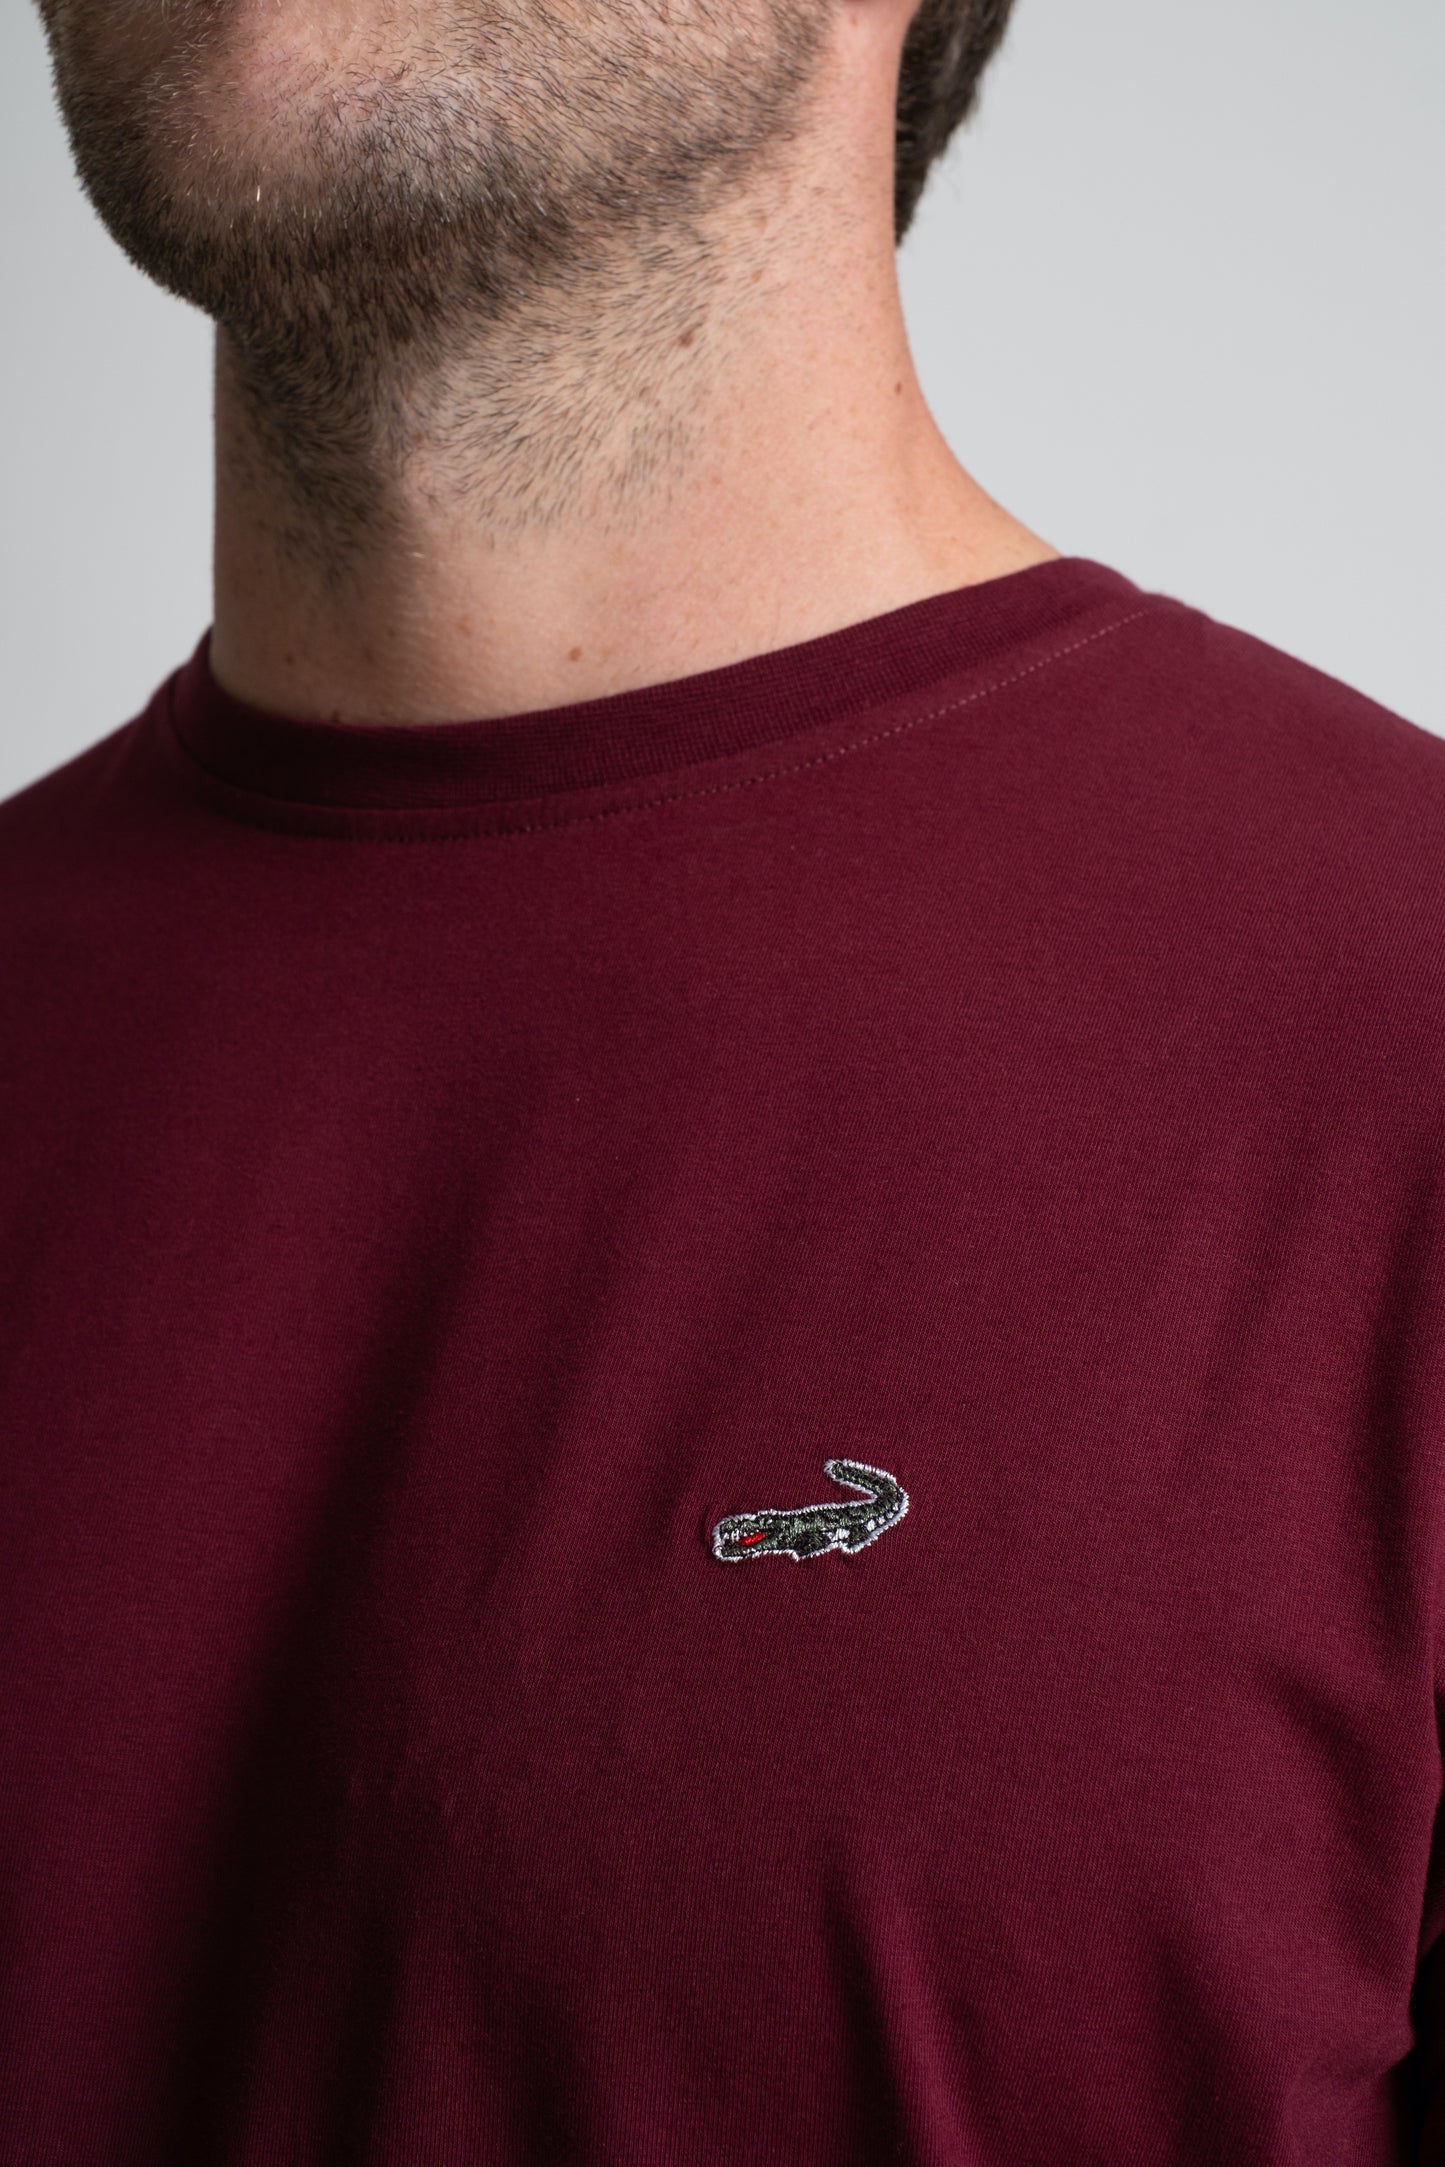 Classic Fit Short sleeves-CasualCrew Neck - Windsor Wine